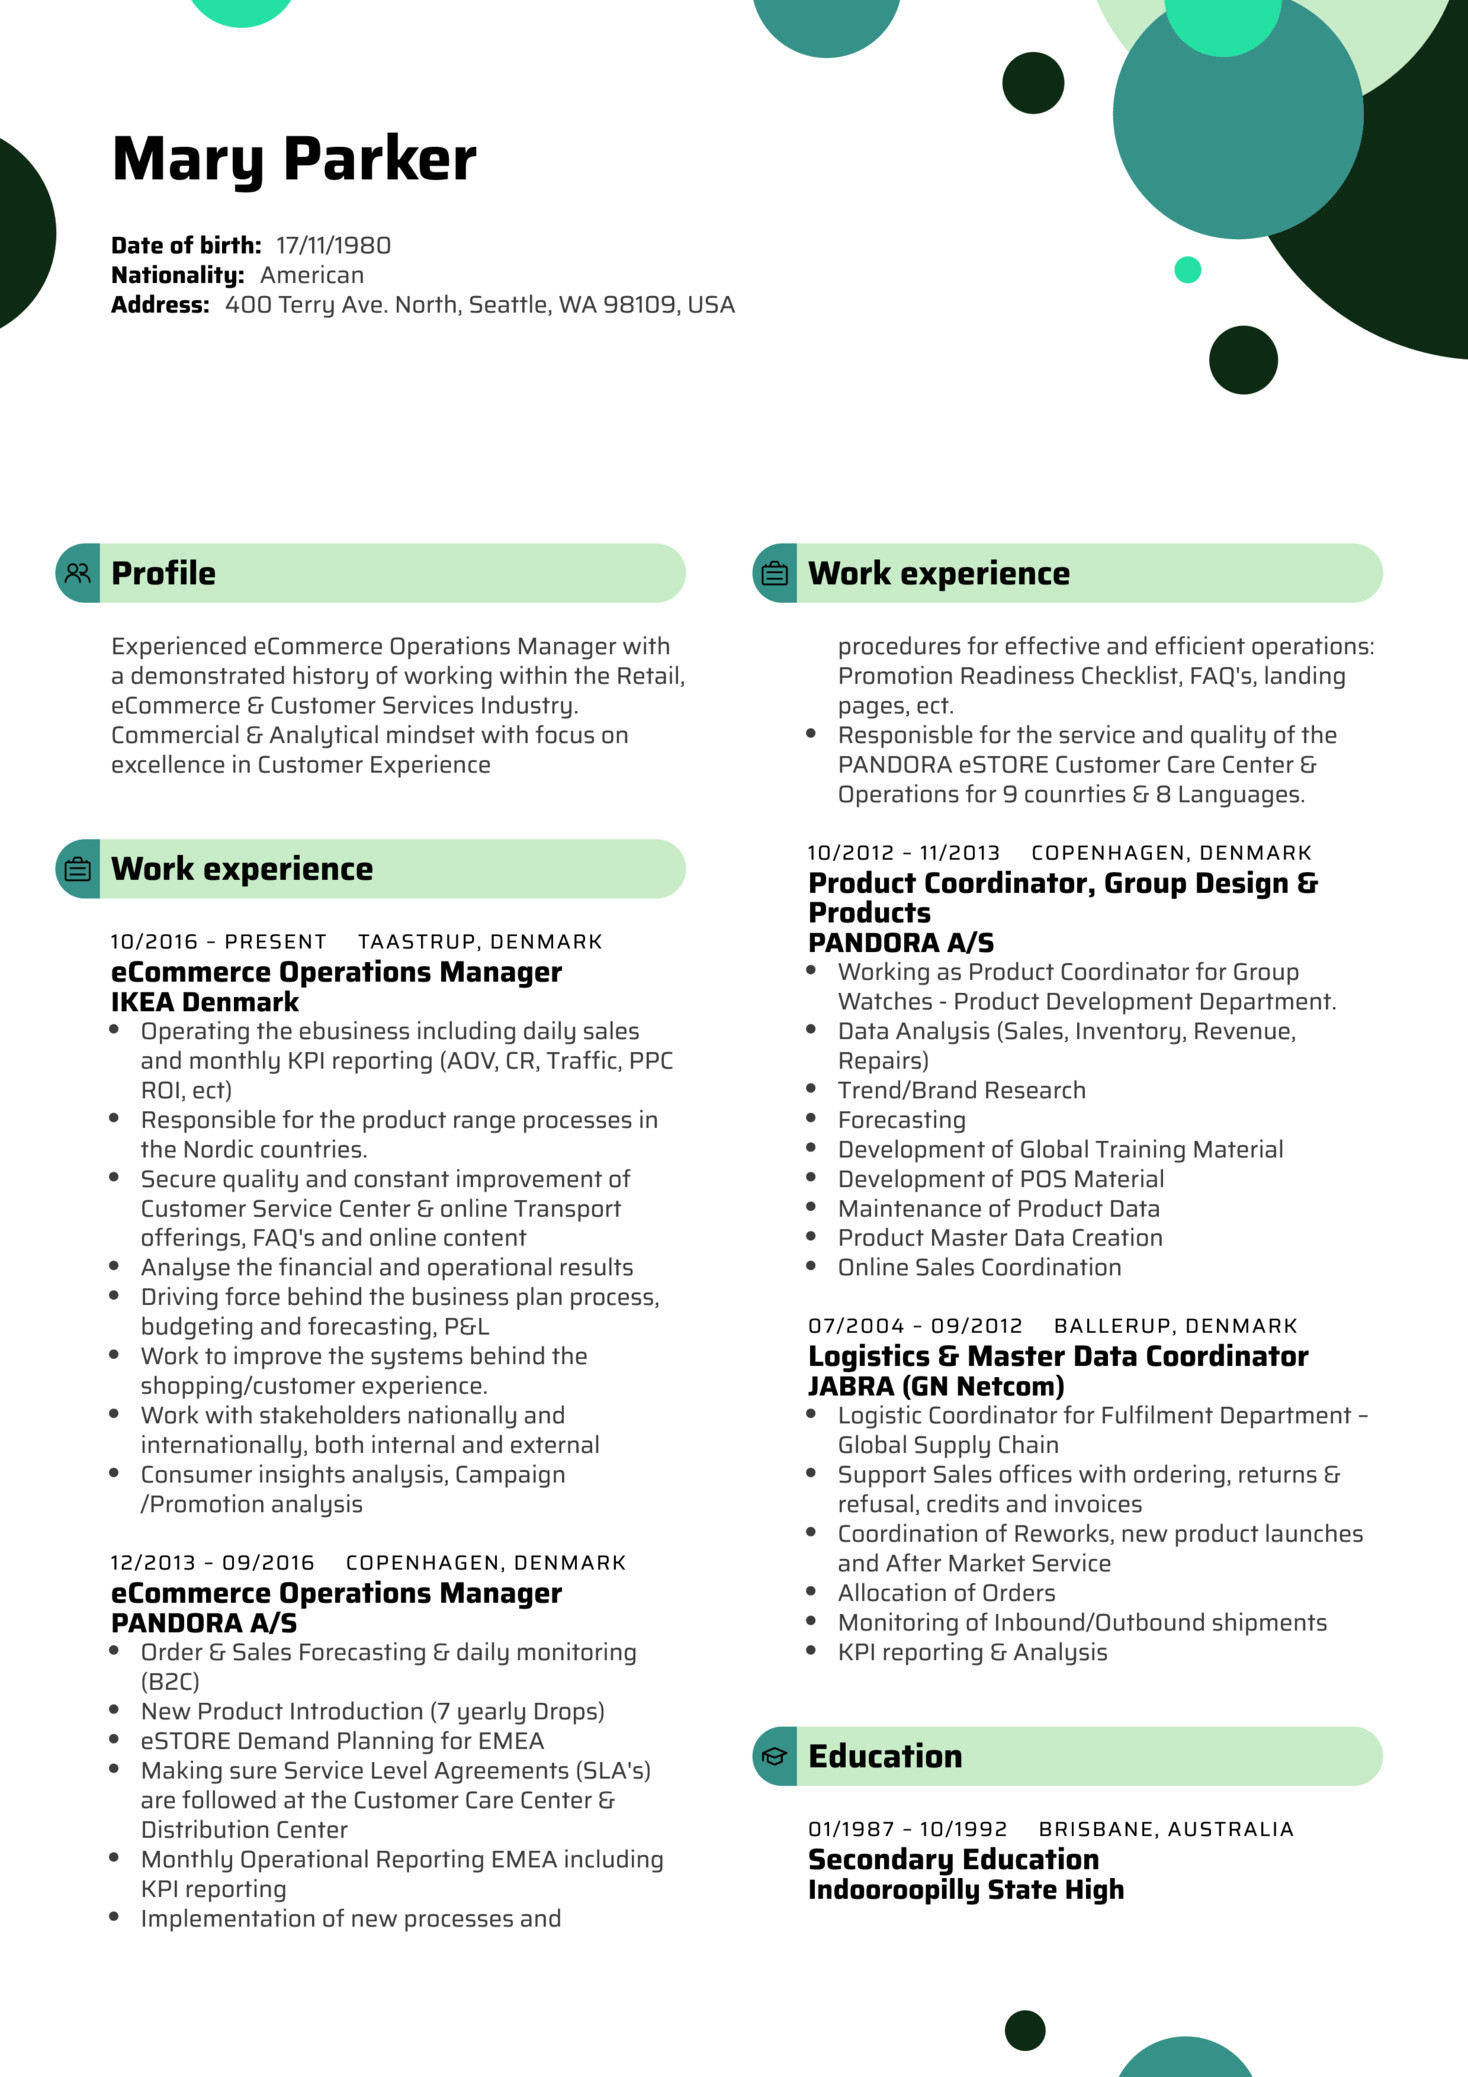 Sample Resume for Ecommerce Operations Manager Resume Examples by Real People Ikea E Merce Operations